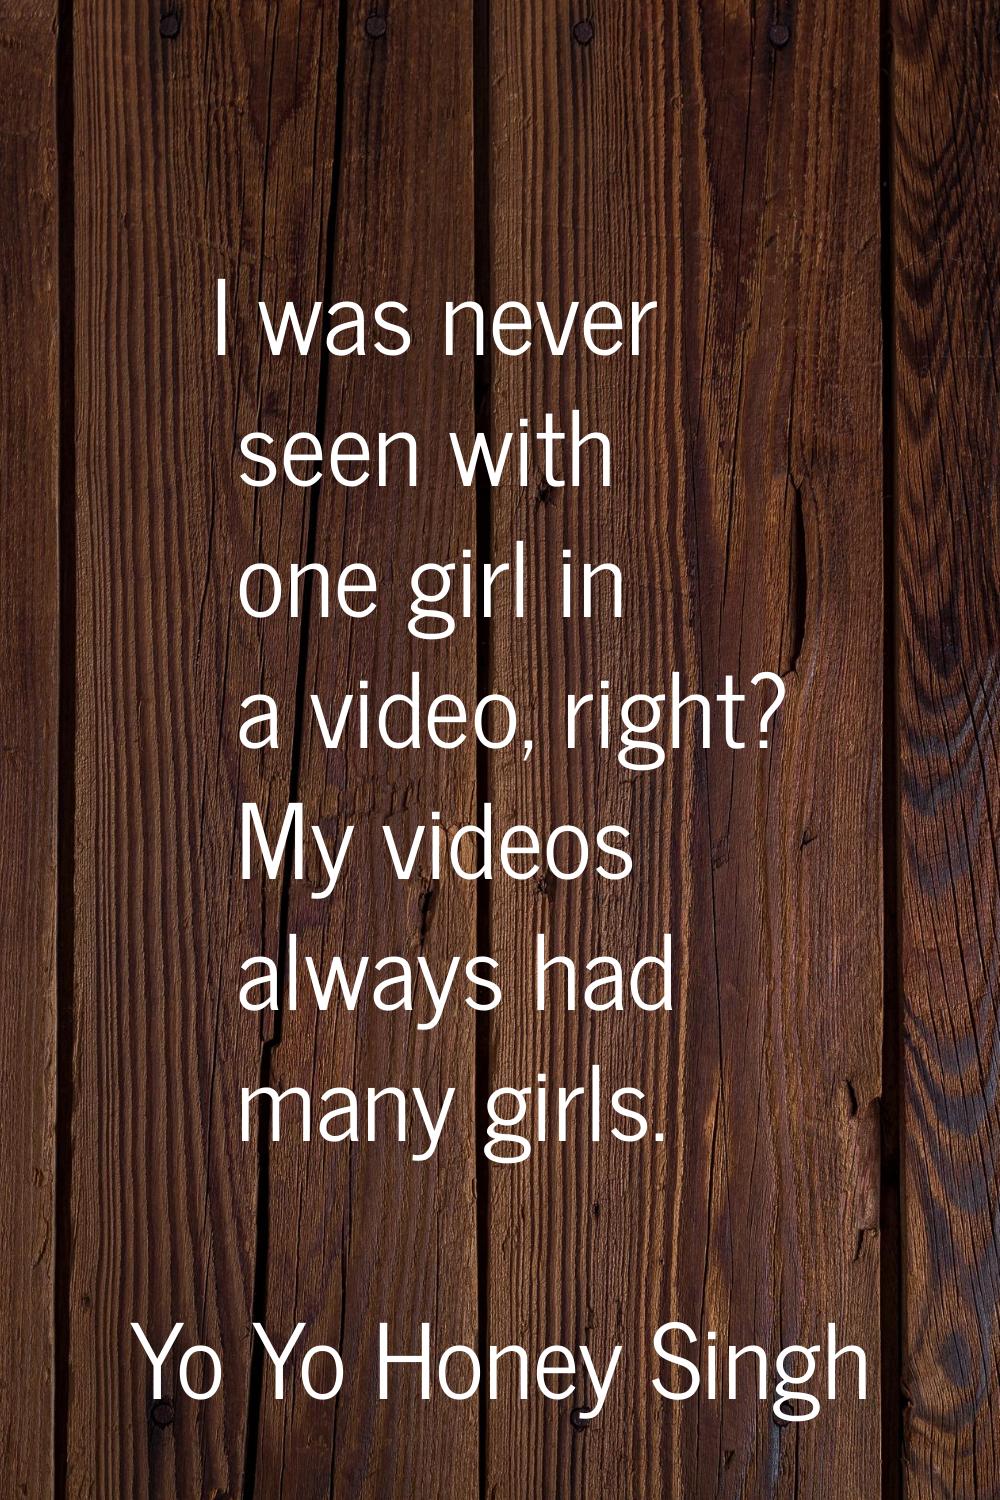 I was never seen with one girl in a video, right? My videos always had many girls.